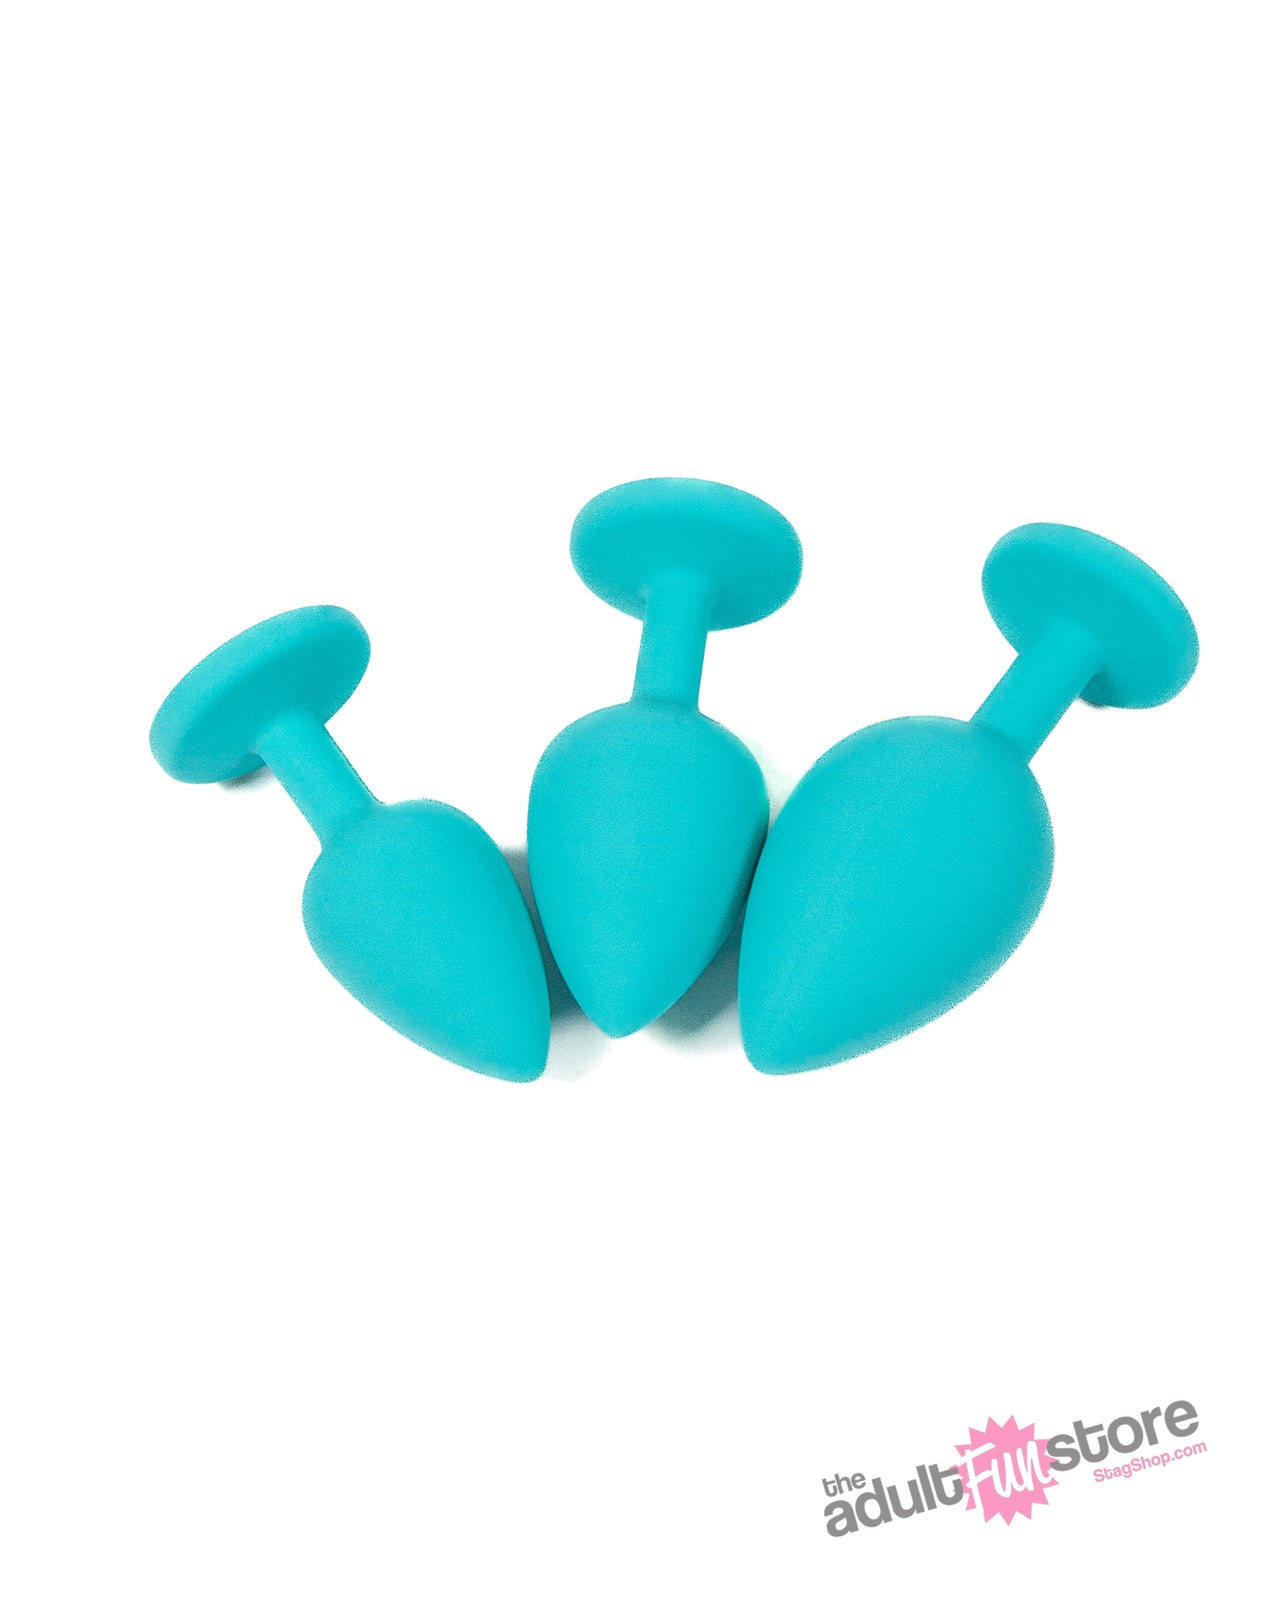 Doc Johnson - A Play - Silicone Anal Trainer Set - Teal - Stag Shop